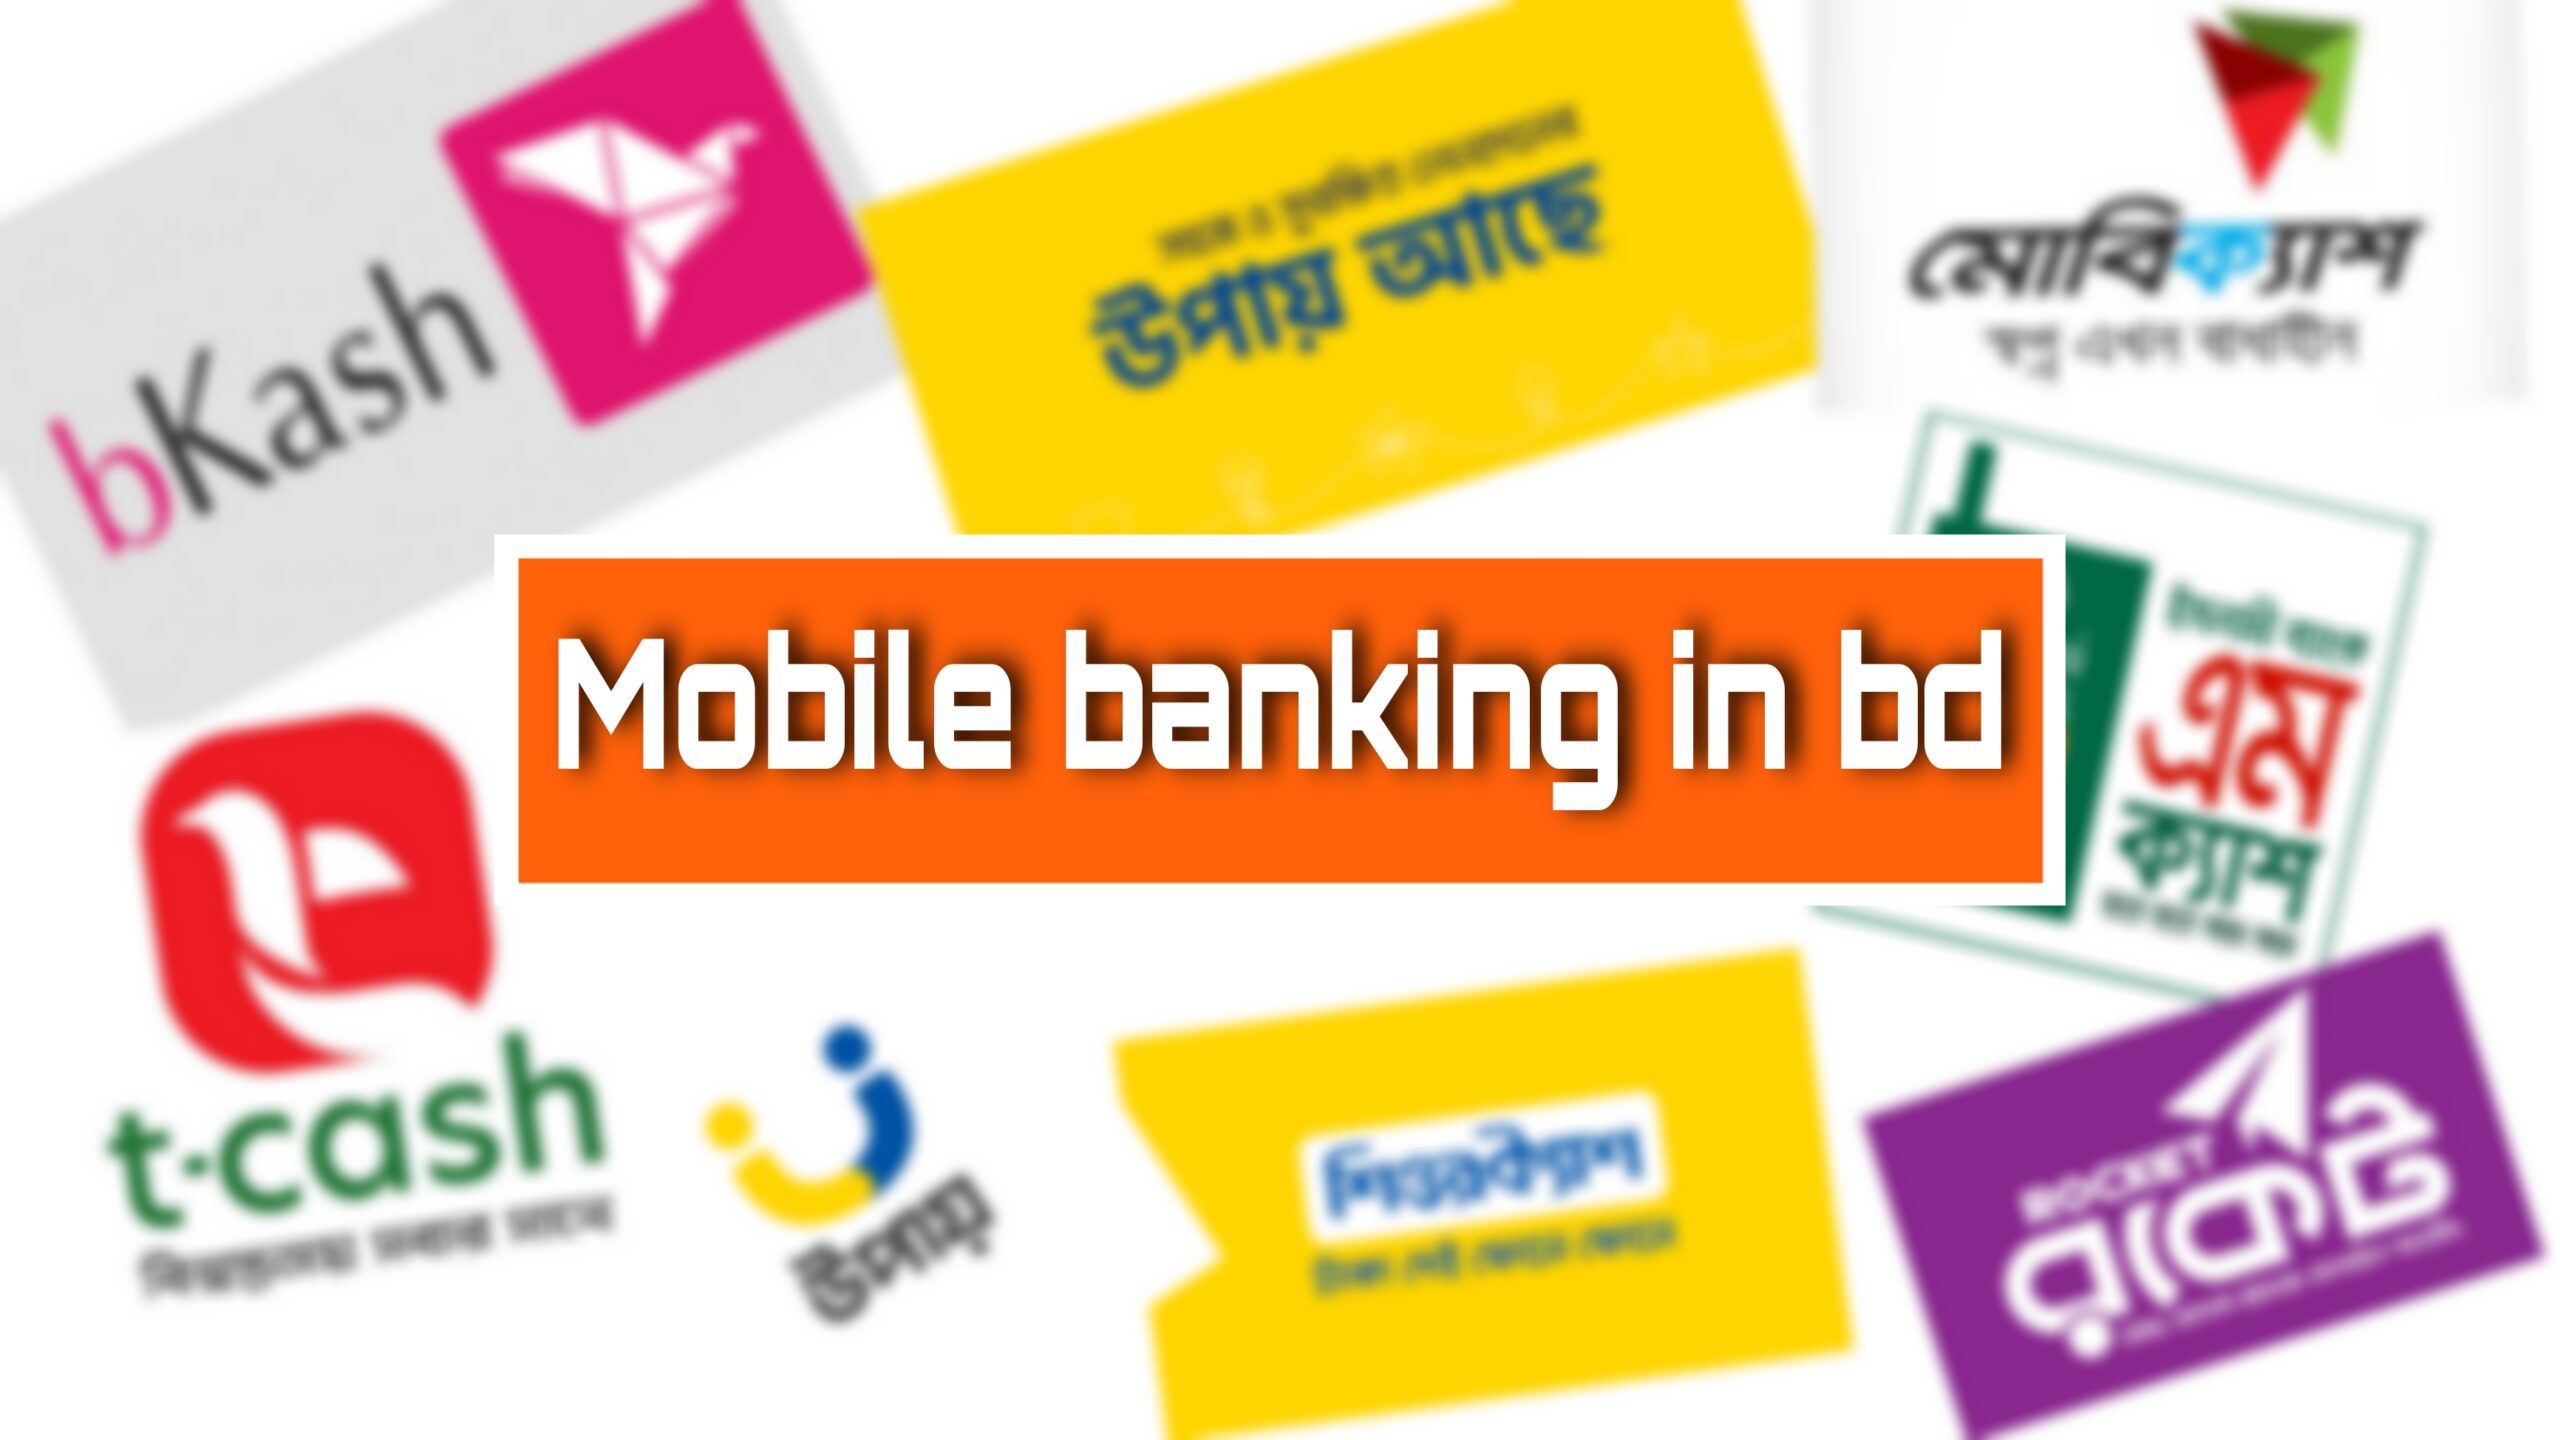 All mobile banking in bd